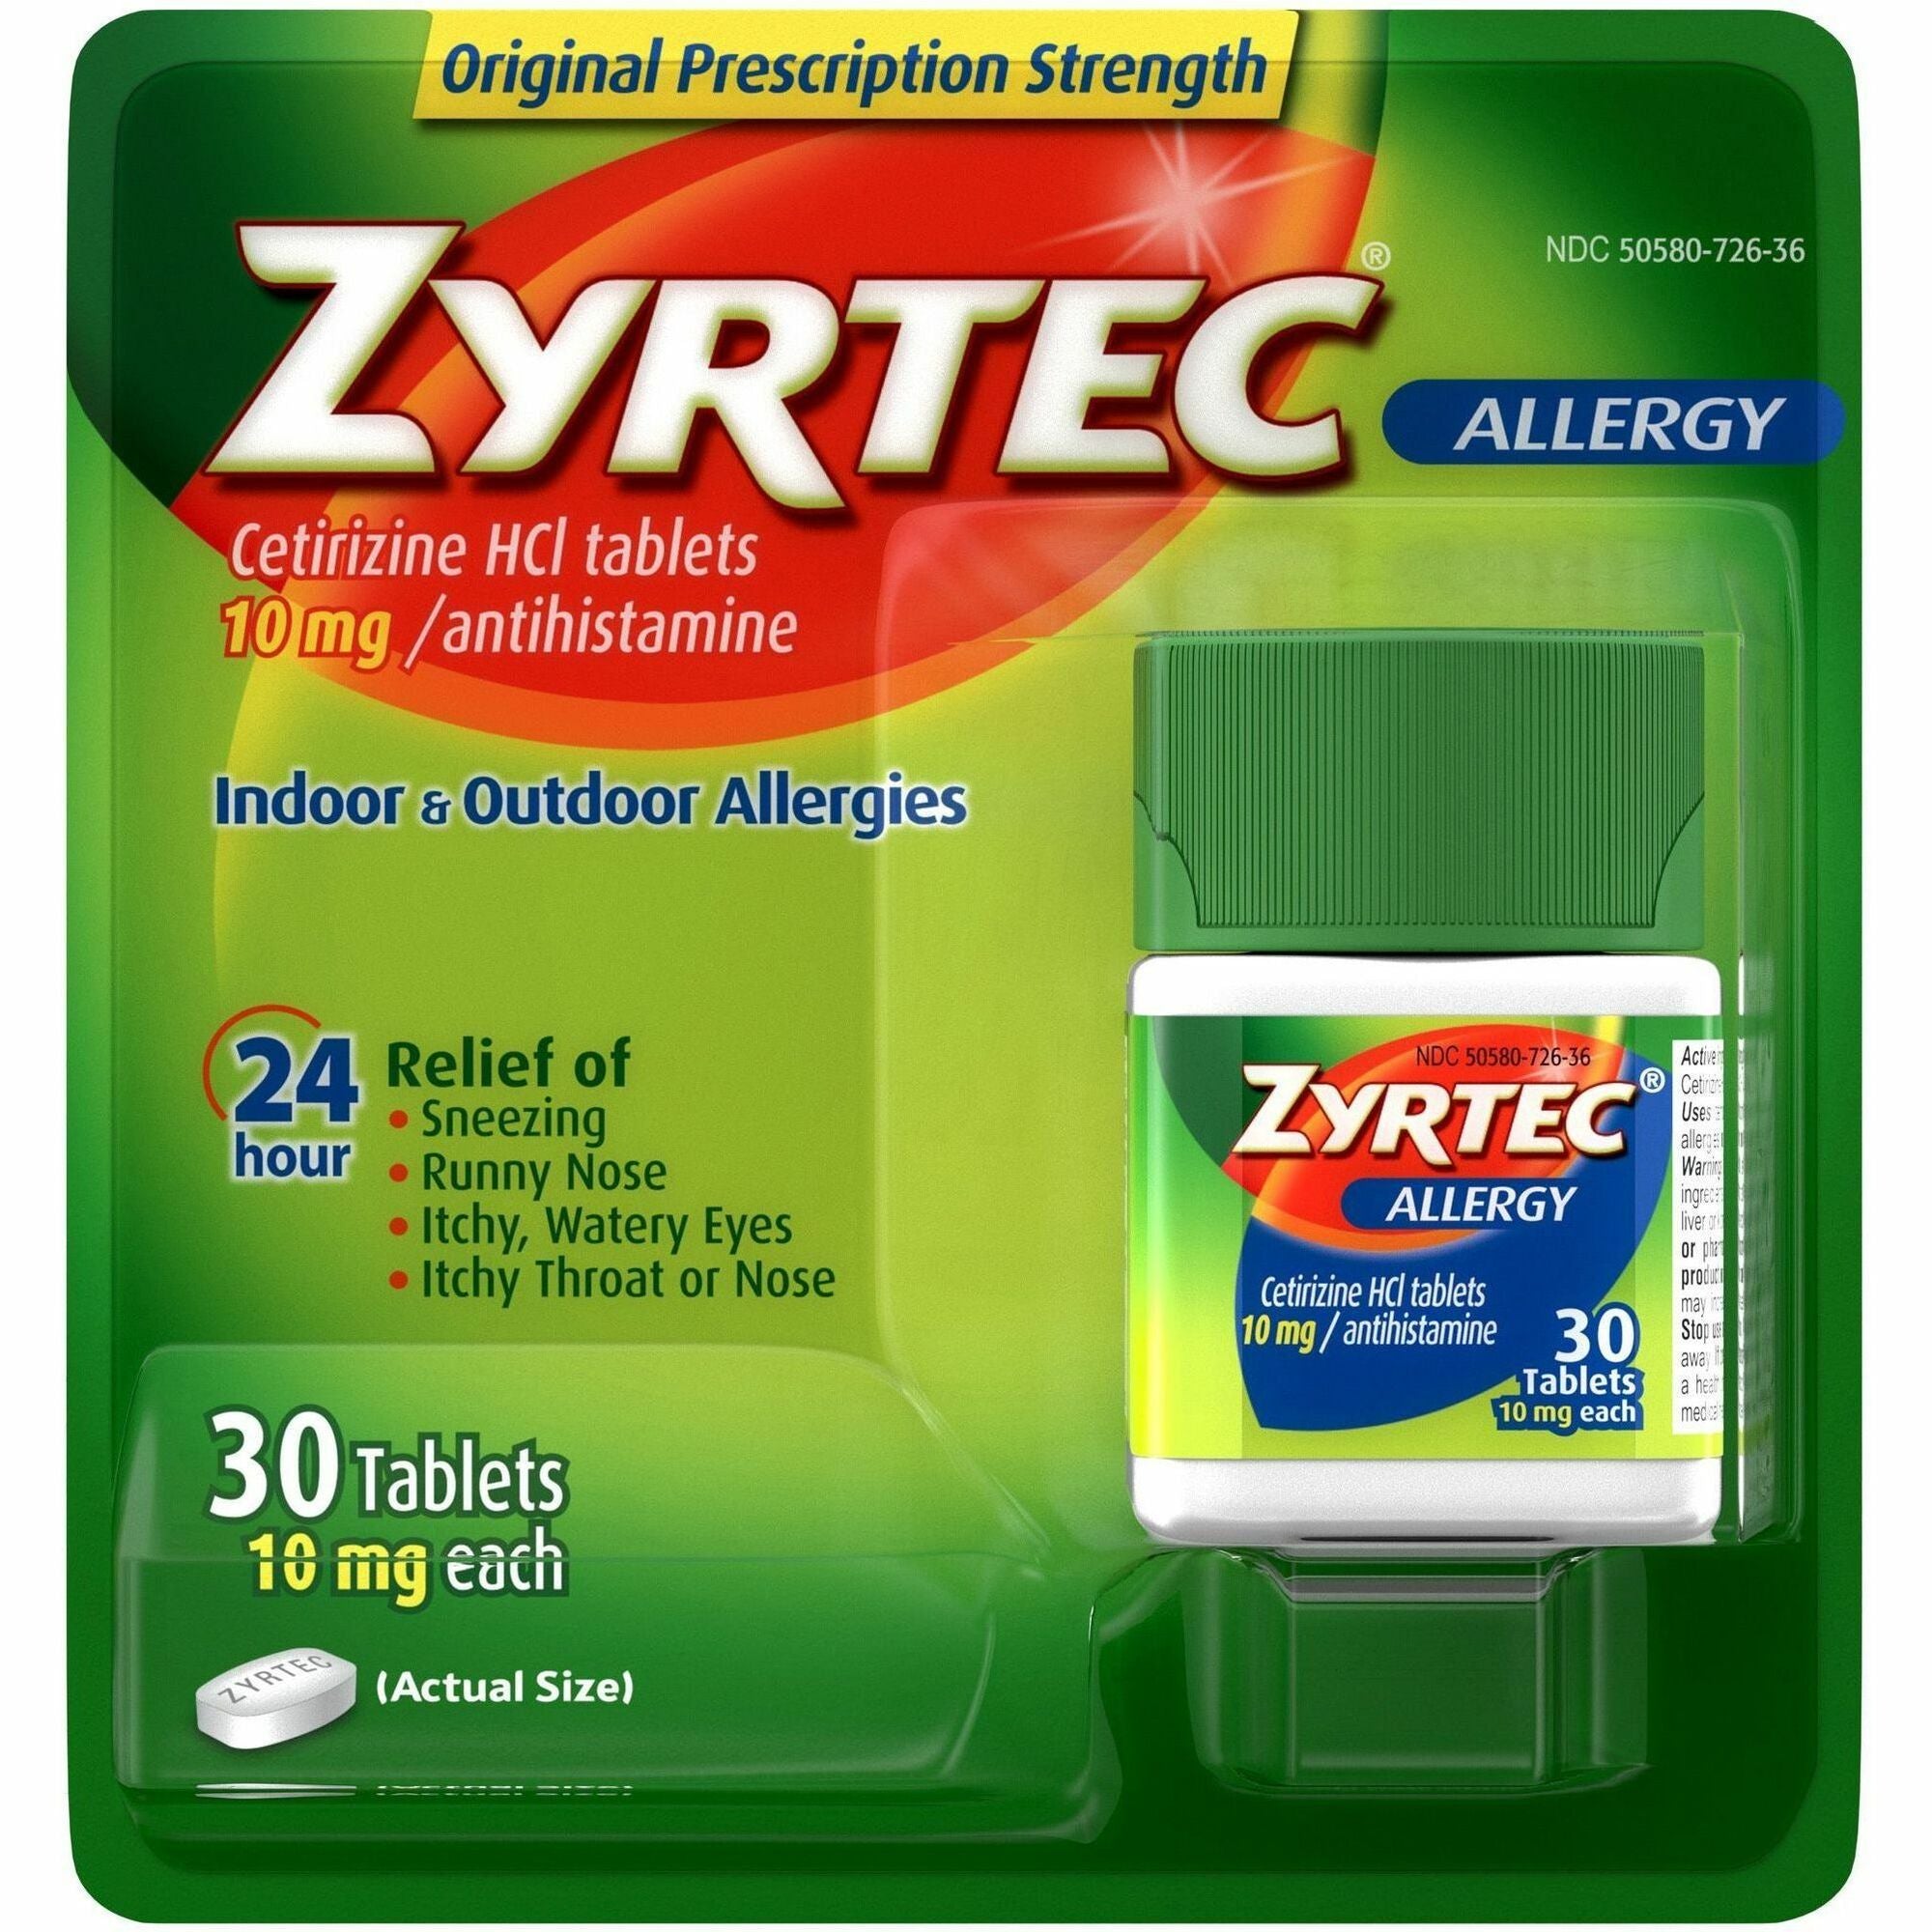 zyrtec-allergy-tablets-for-runny-nose-sneezing-itchy-throat-30-box_joj20436 - 1